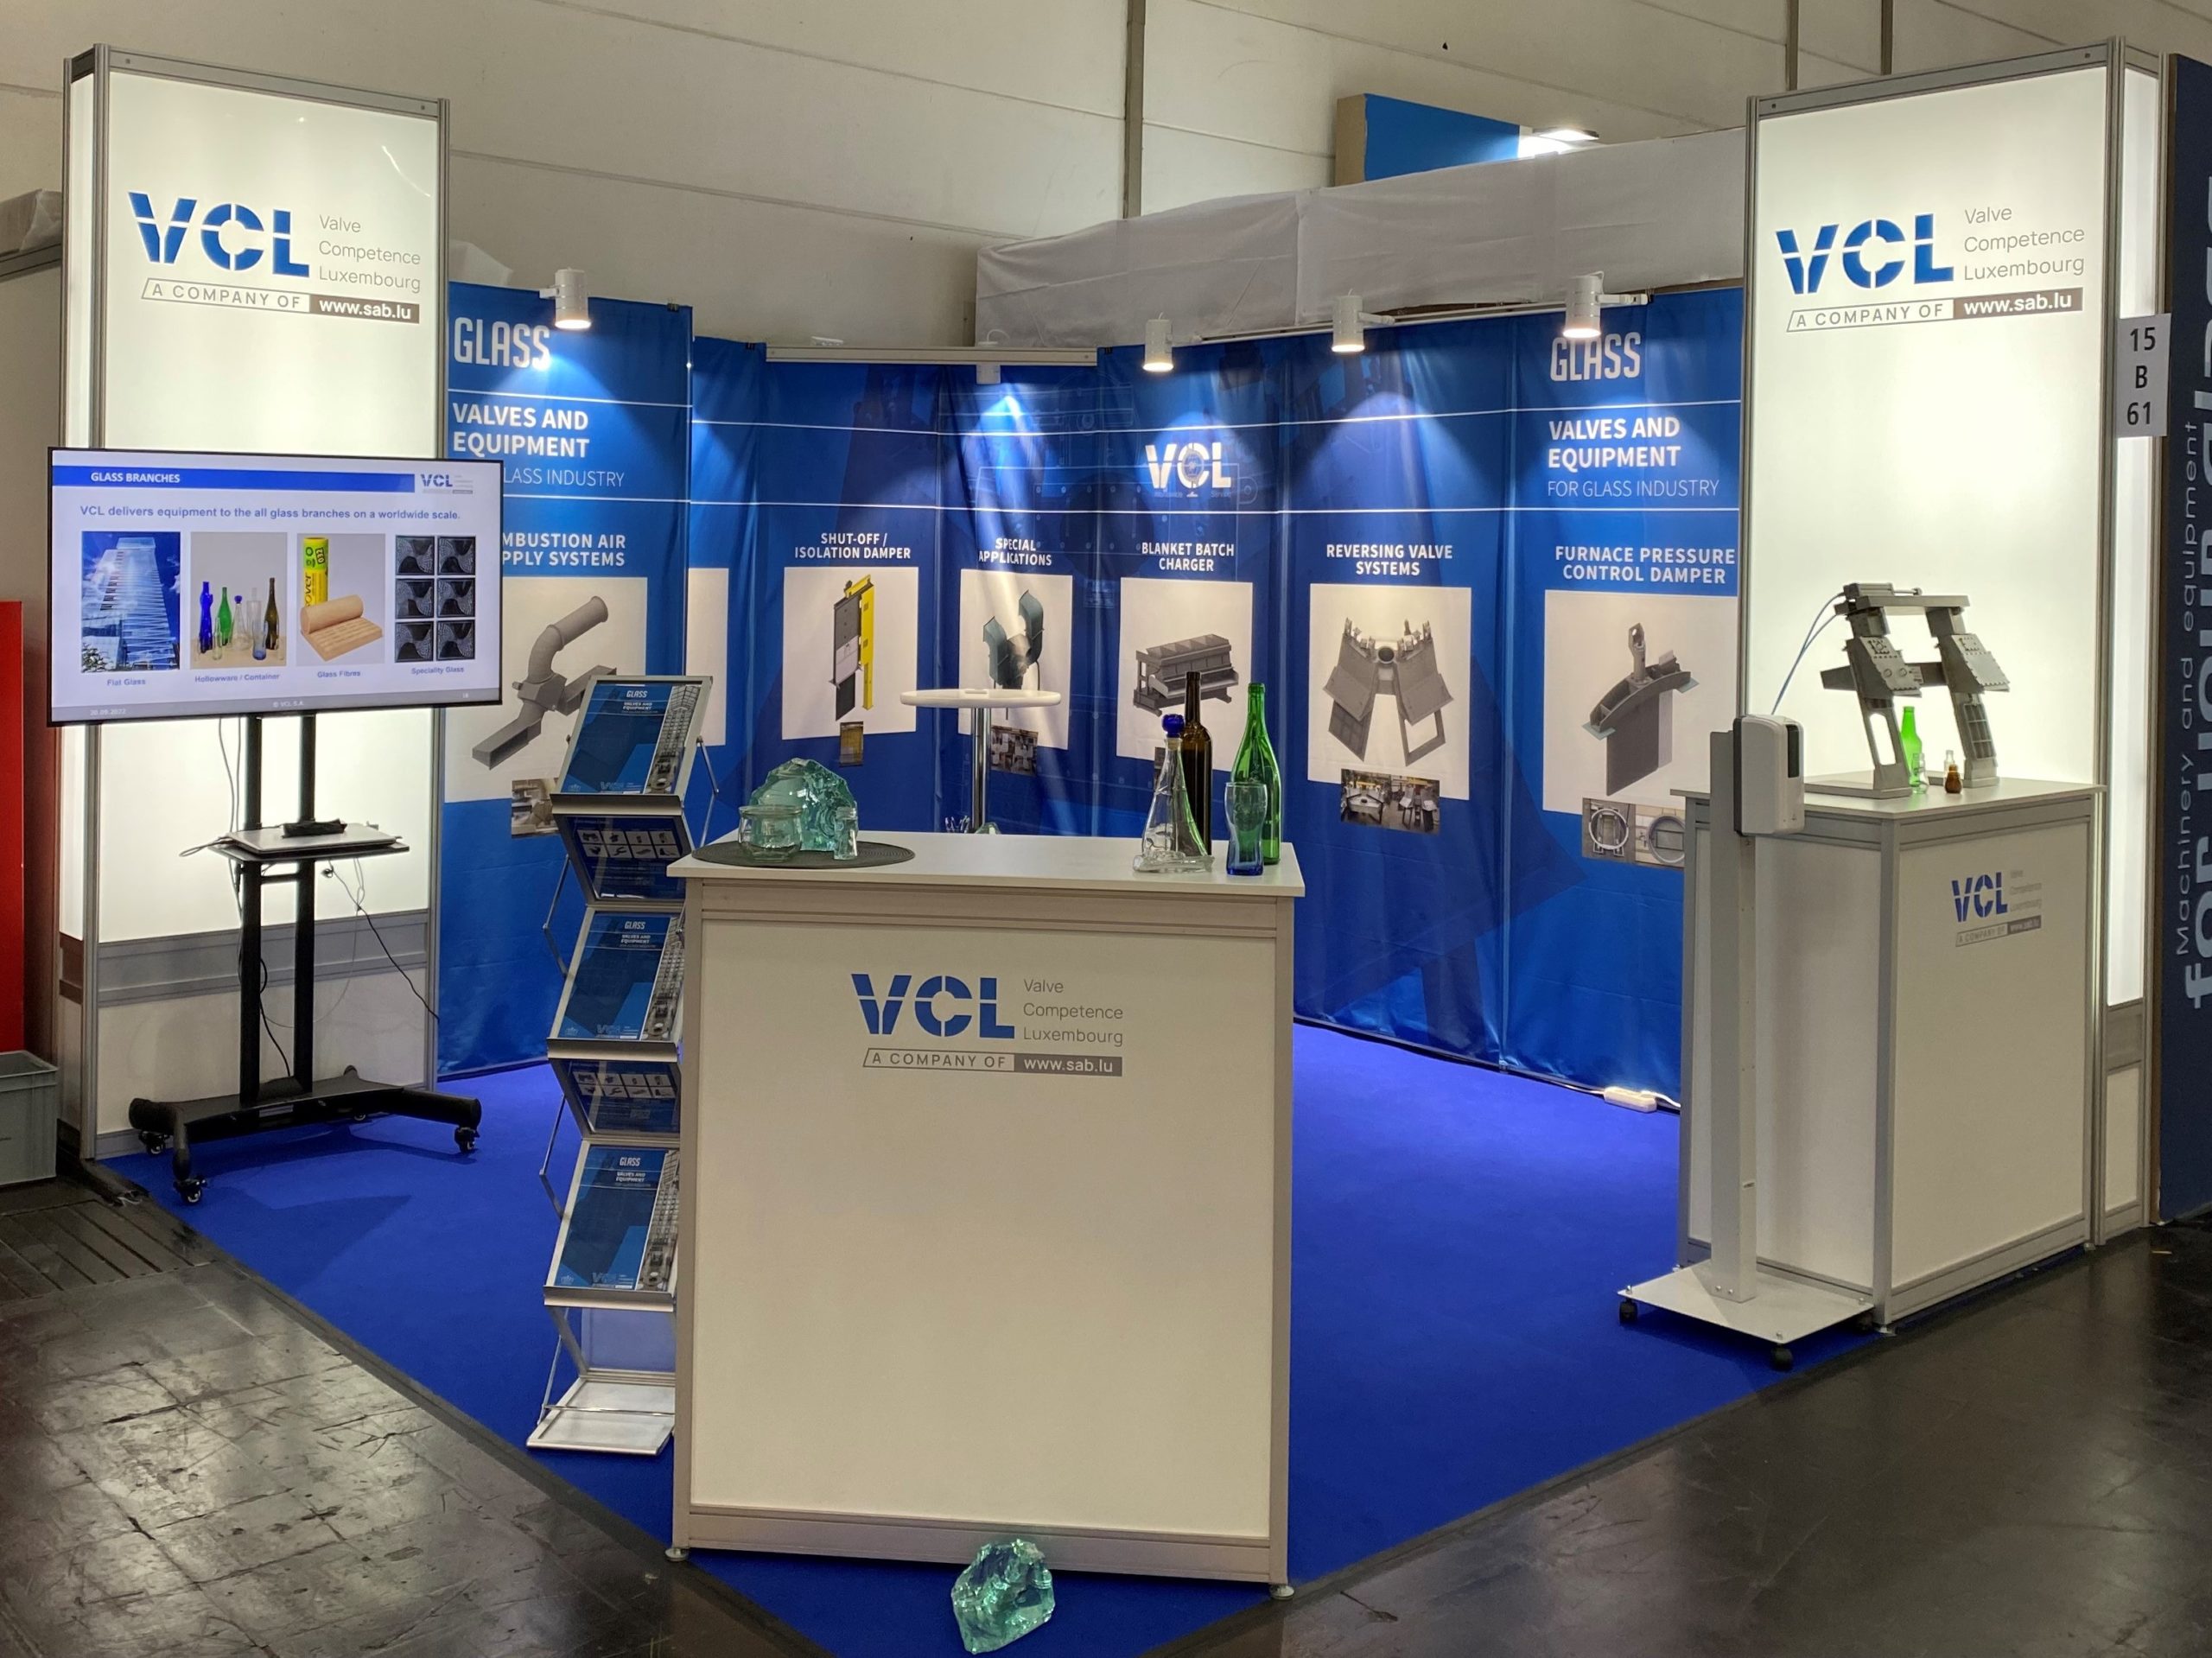 Thank you for visiting VCL at the GLASSTEC 2022